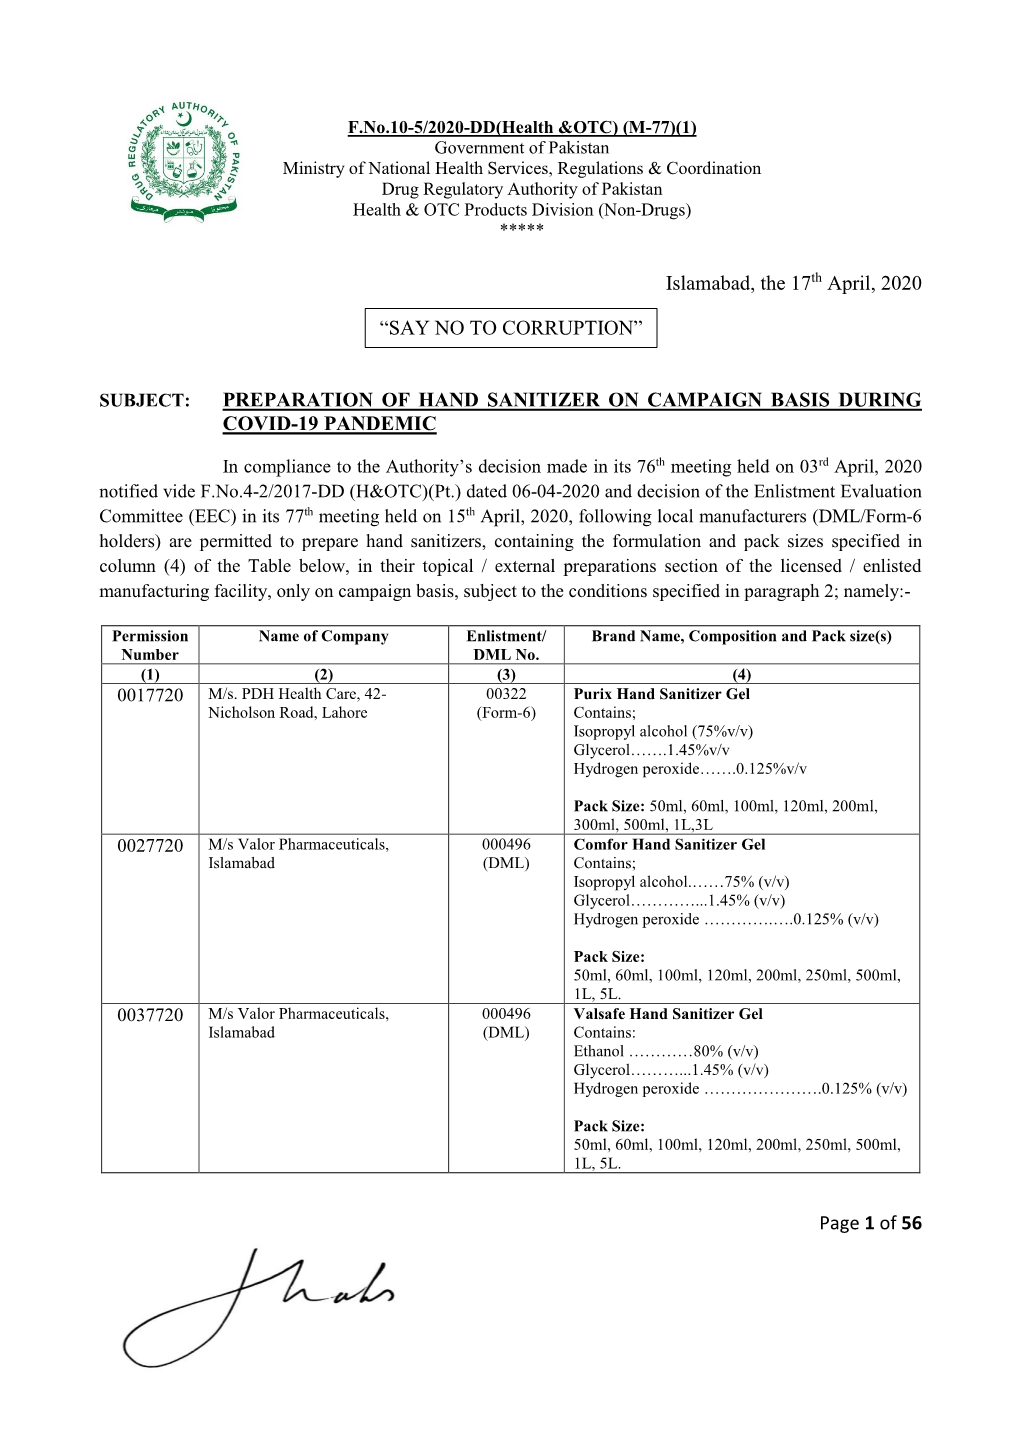 Page 1 of 56 Islamabad, the 17Th April, 2020 PREPARATION of HAND SANITIZER on CAMPAIGN BASIS DURING COVID-19 PANDEMIC